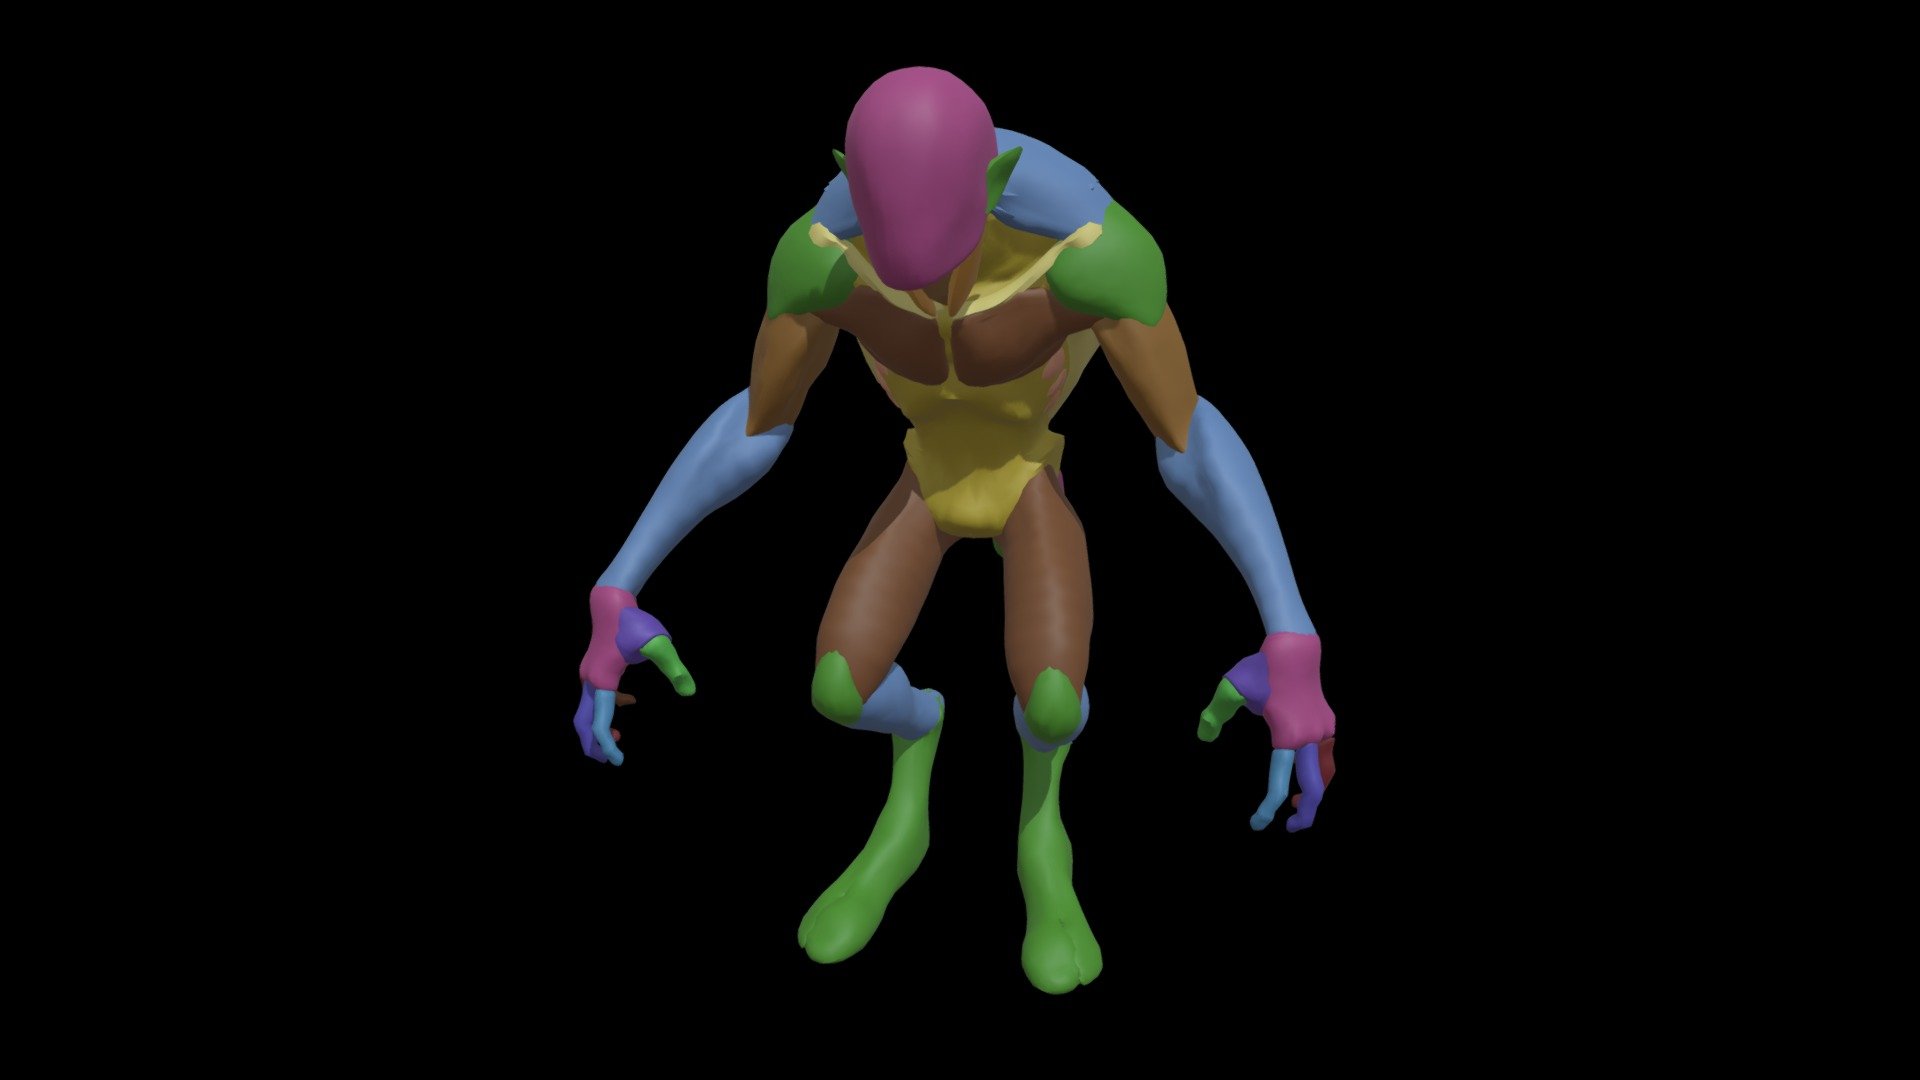 Monster Anatomy basemesh

ZTL with polygroups 
Files types: .ztl, .fbx and .obj
You can use this mesh to speed up your character work.
Hope you like it!
Follow me: https://www.artstation.com/zeroart3d
And Inst for some Wip images: https://www.instagram.com/zeroart_project/
Thank you 3d model